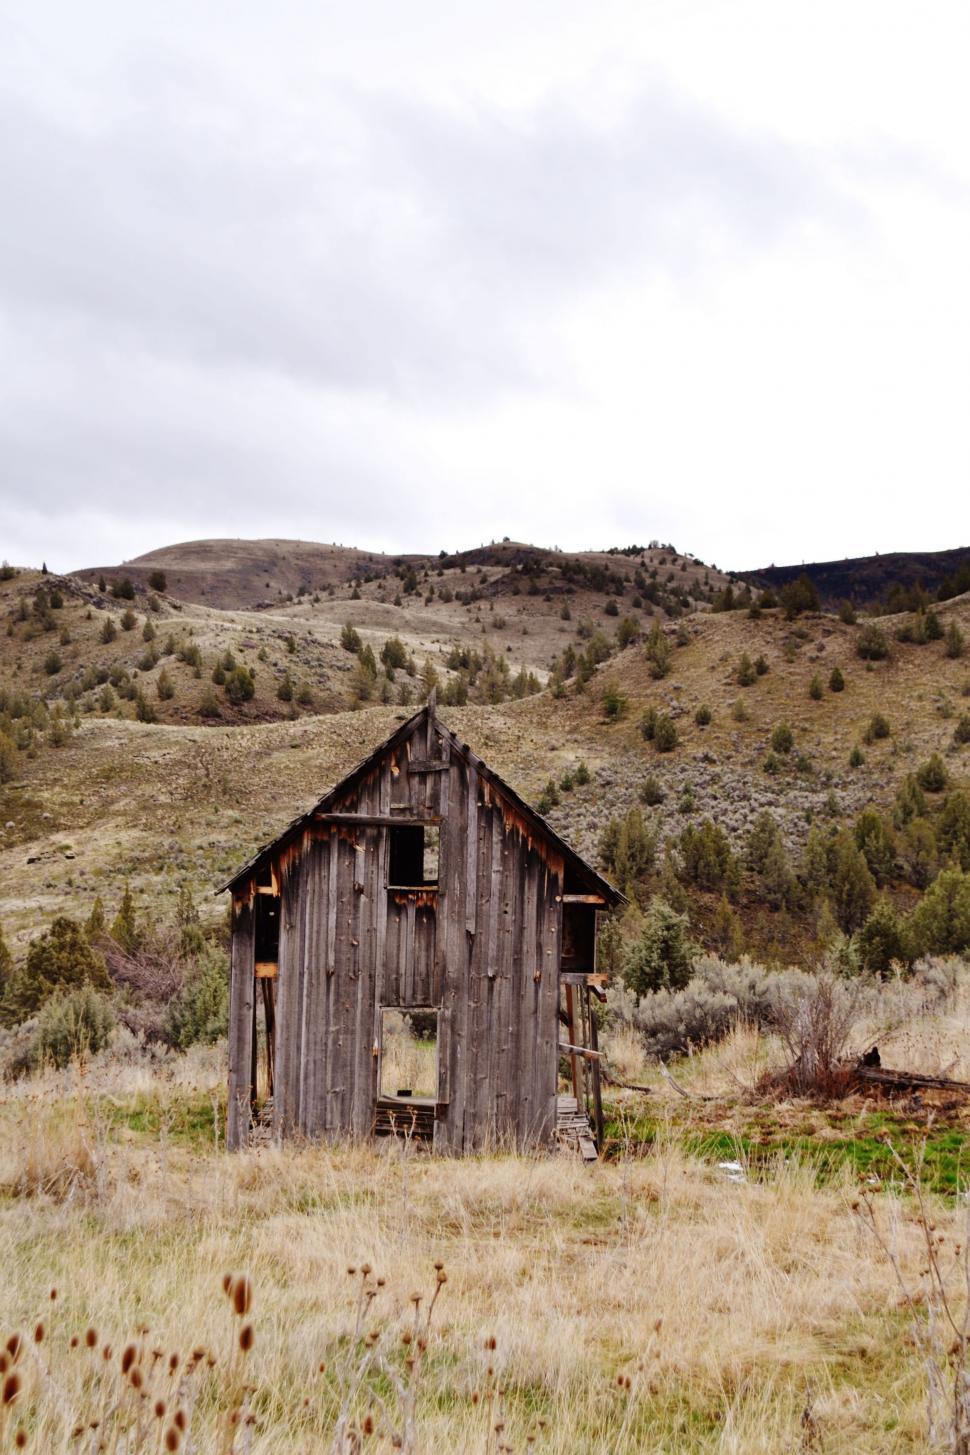 Free Image of Old Wooden Building in Field With Mountain Background 